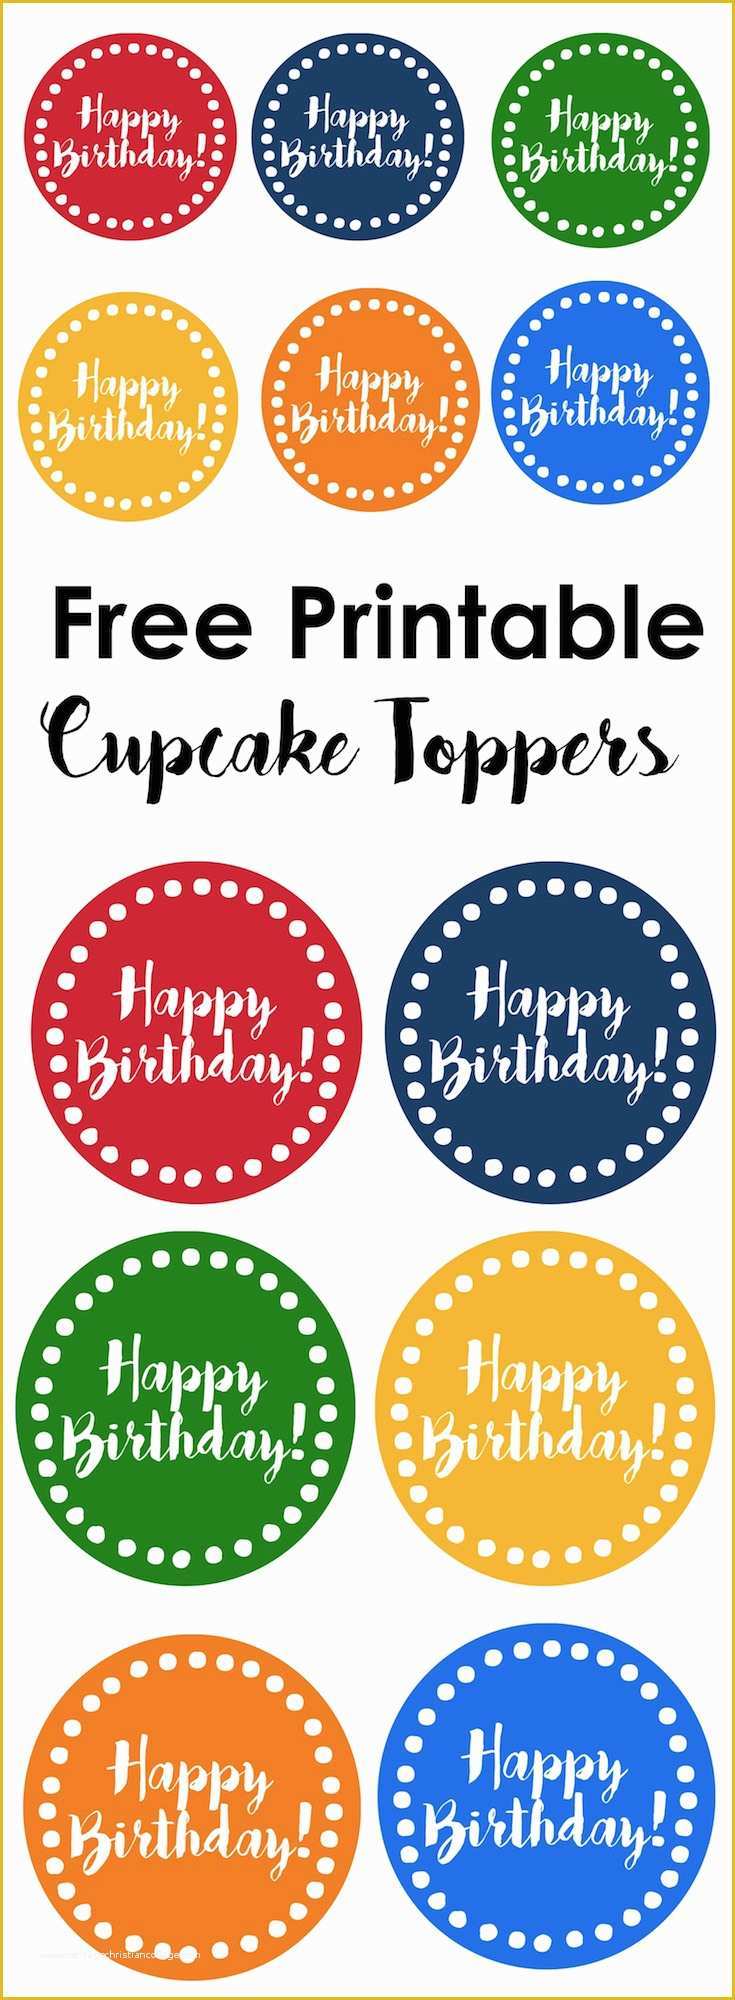 Free Cake Templates Print Of Happy Birthday Cupcake toppers Free Printable Paper